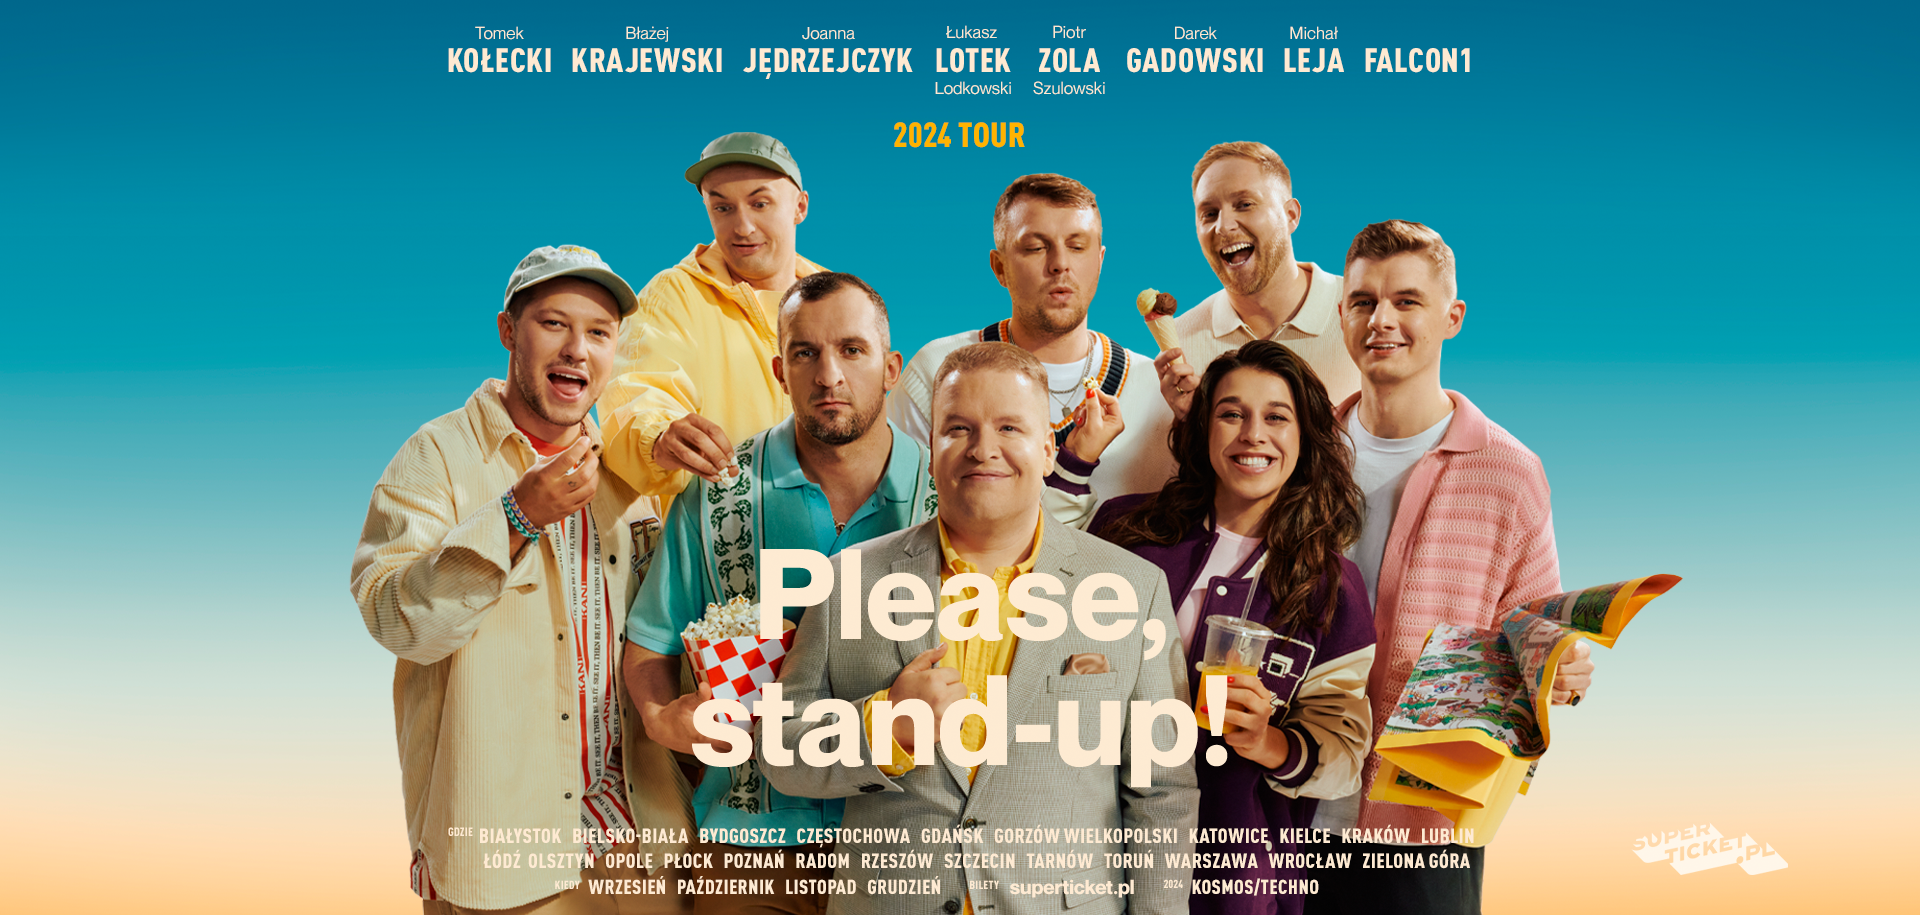 Please, Stand-up! Płock 2024